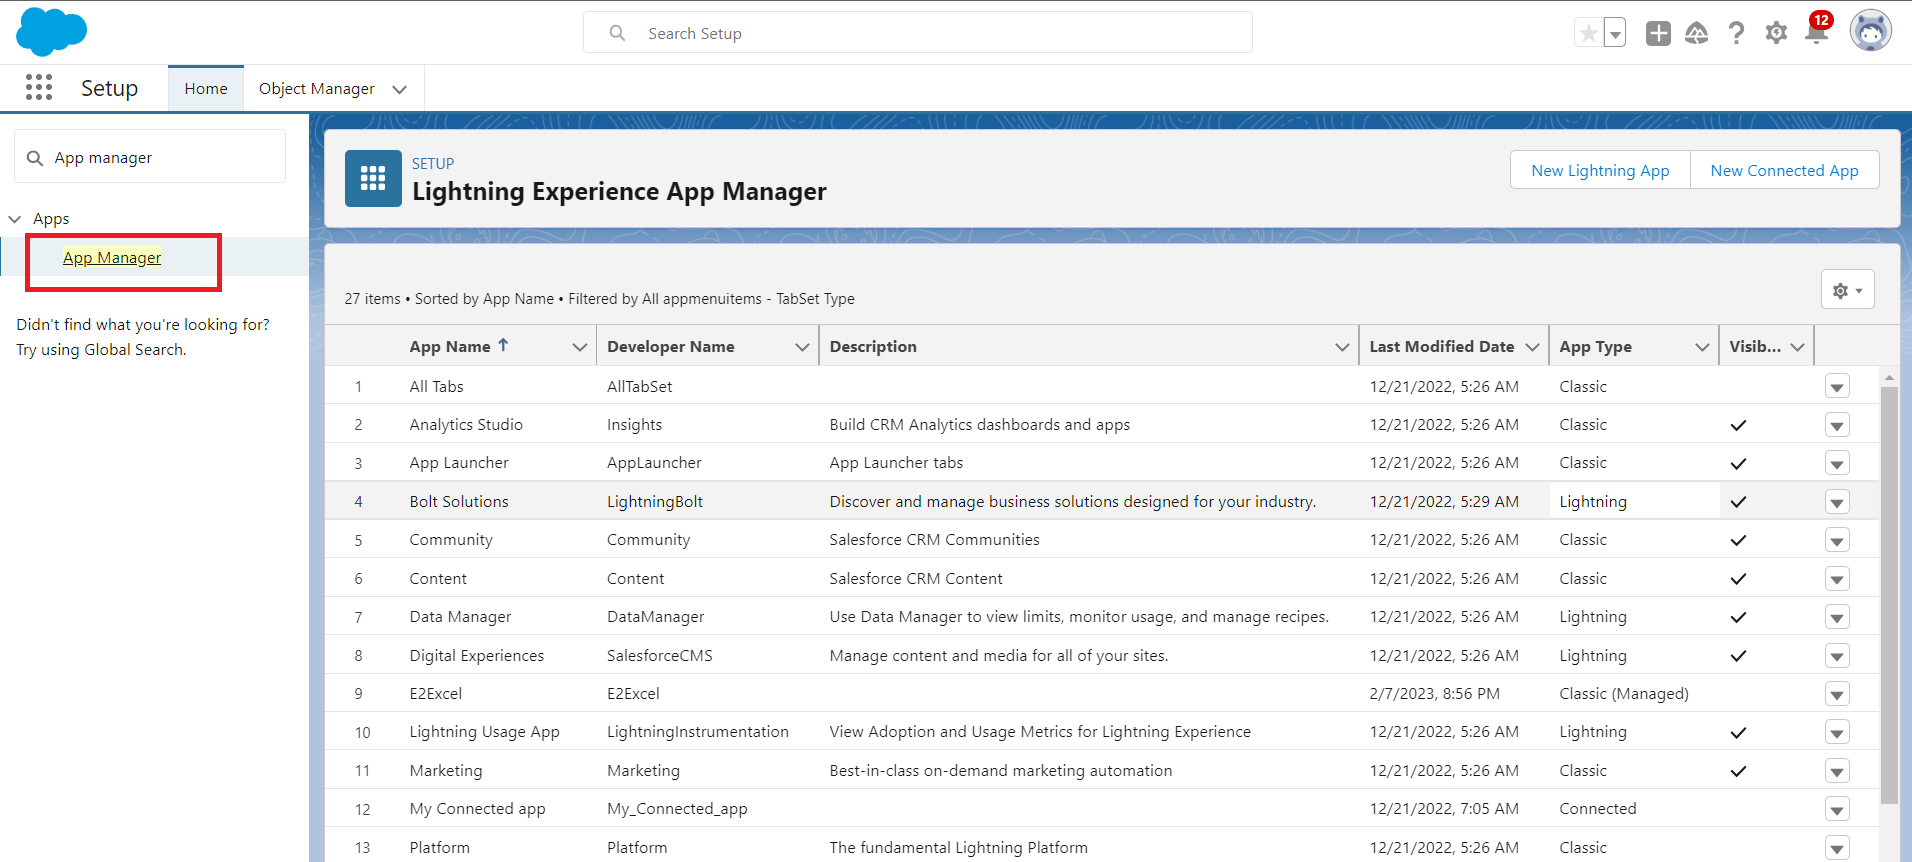 Open App Manager to add the To Do List component to your Home page